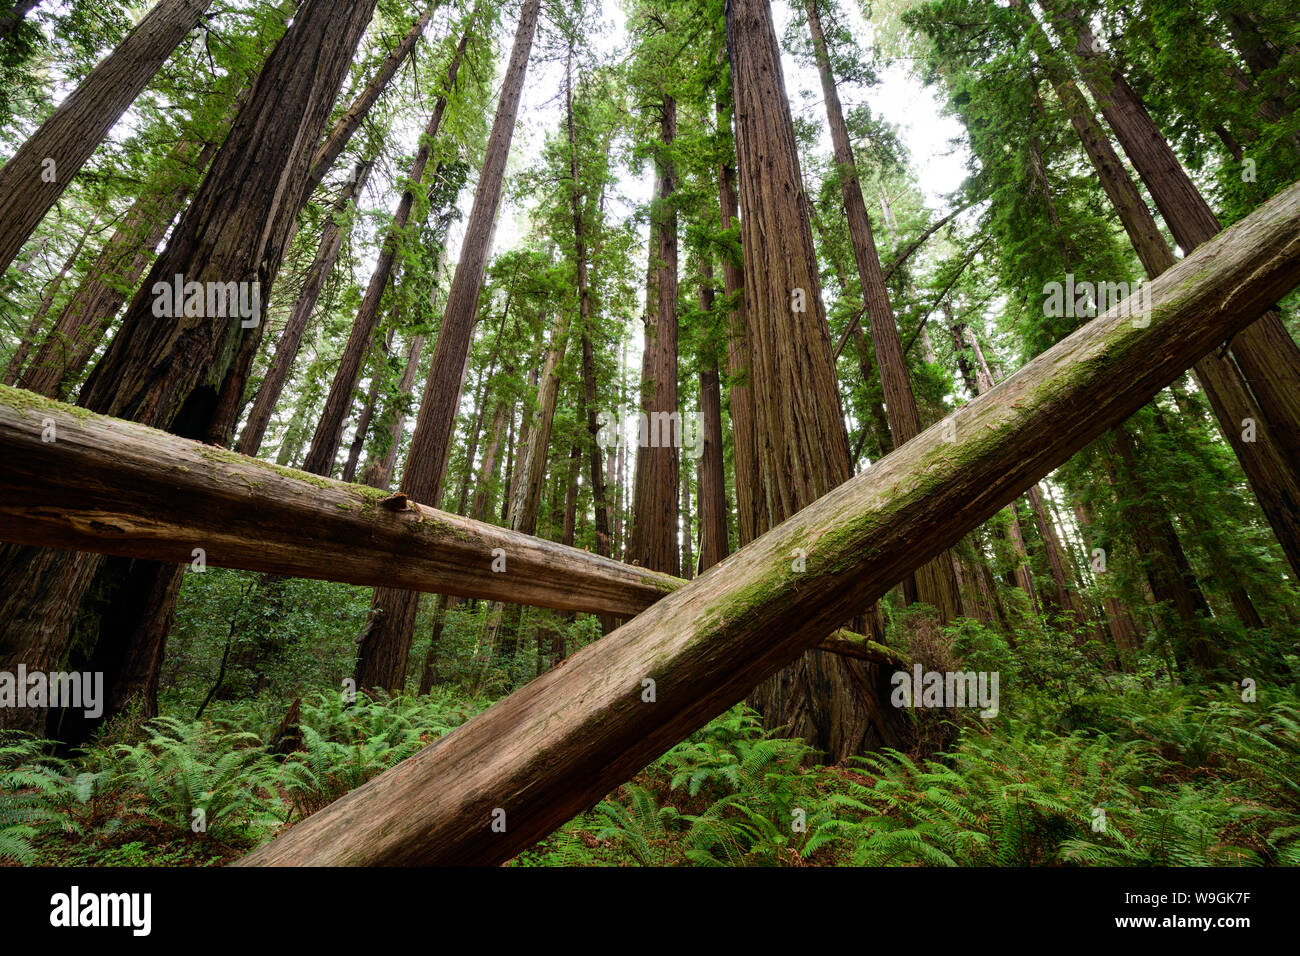 The Cheatham Grove of ancient redwood trees near Crescent City, California is where the speeder chase scenes from Return of the Jedi were filmed. Stock Photo